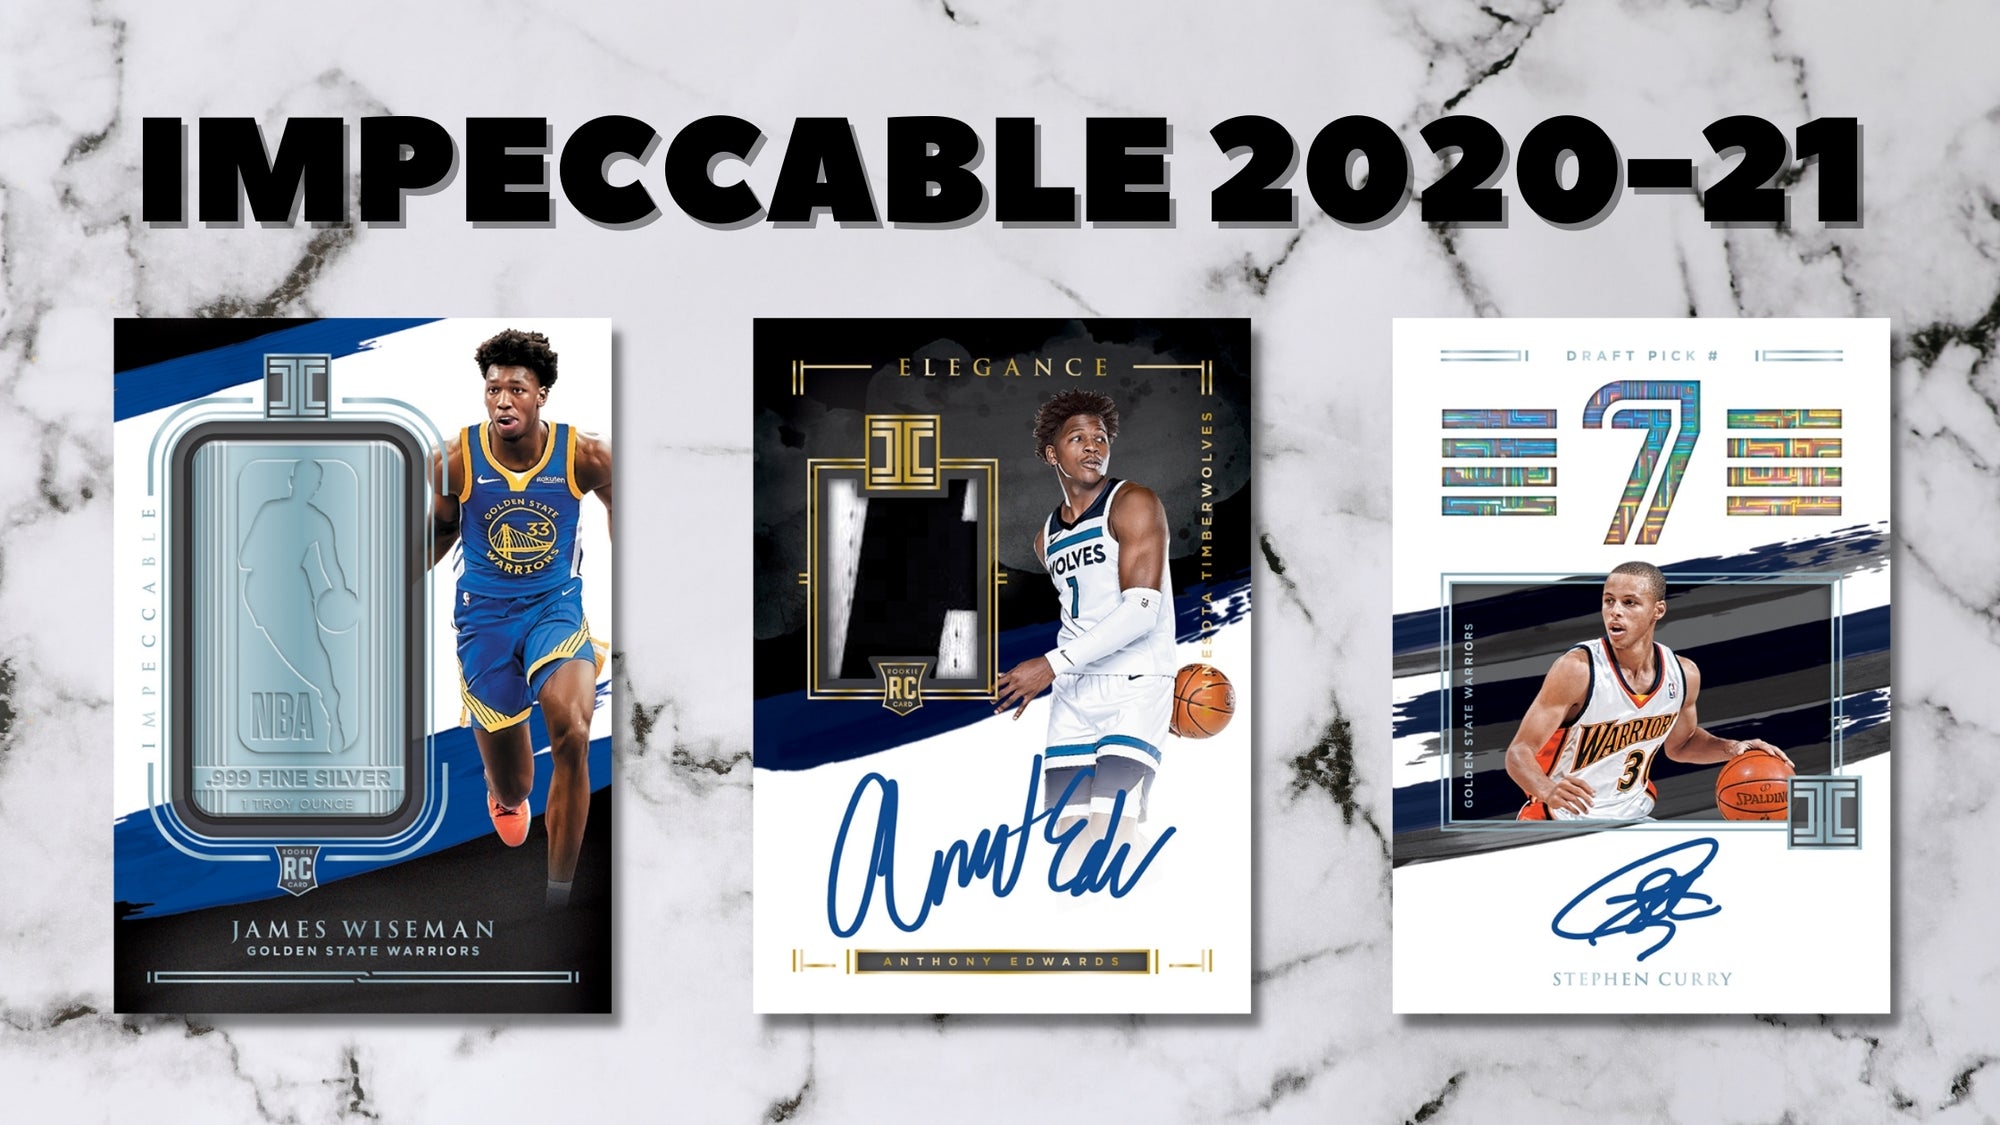 Panini 2020-21 Impeccable Basketball Preview!